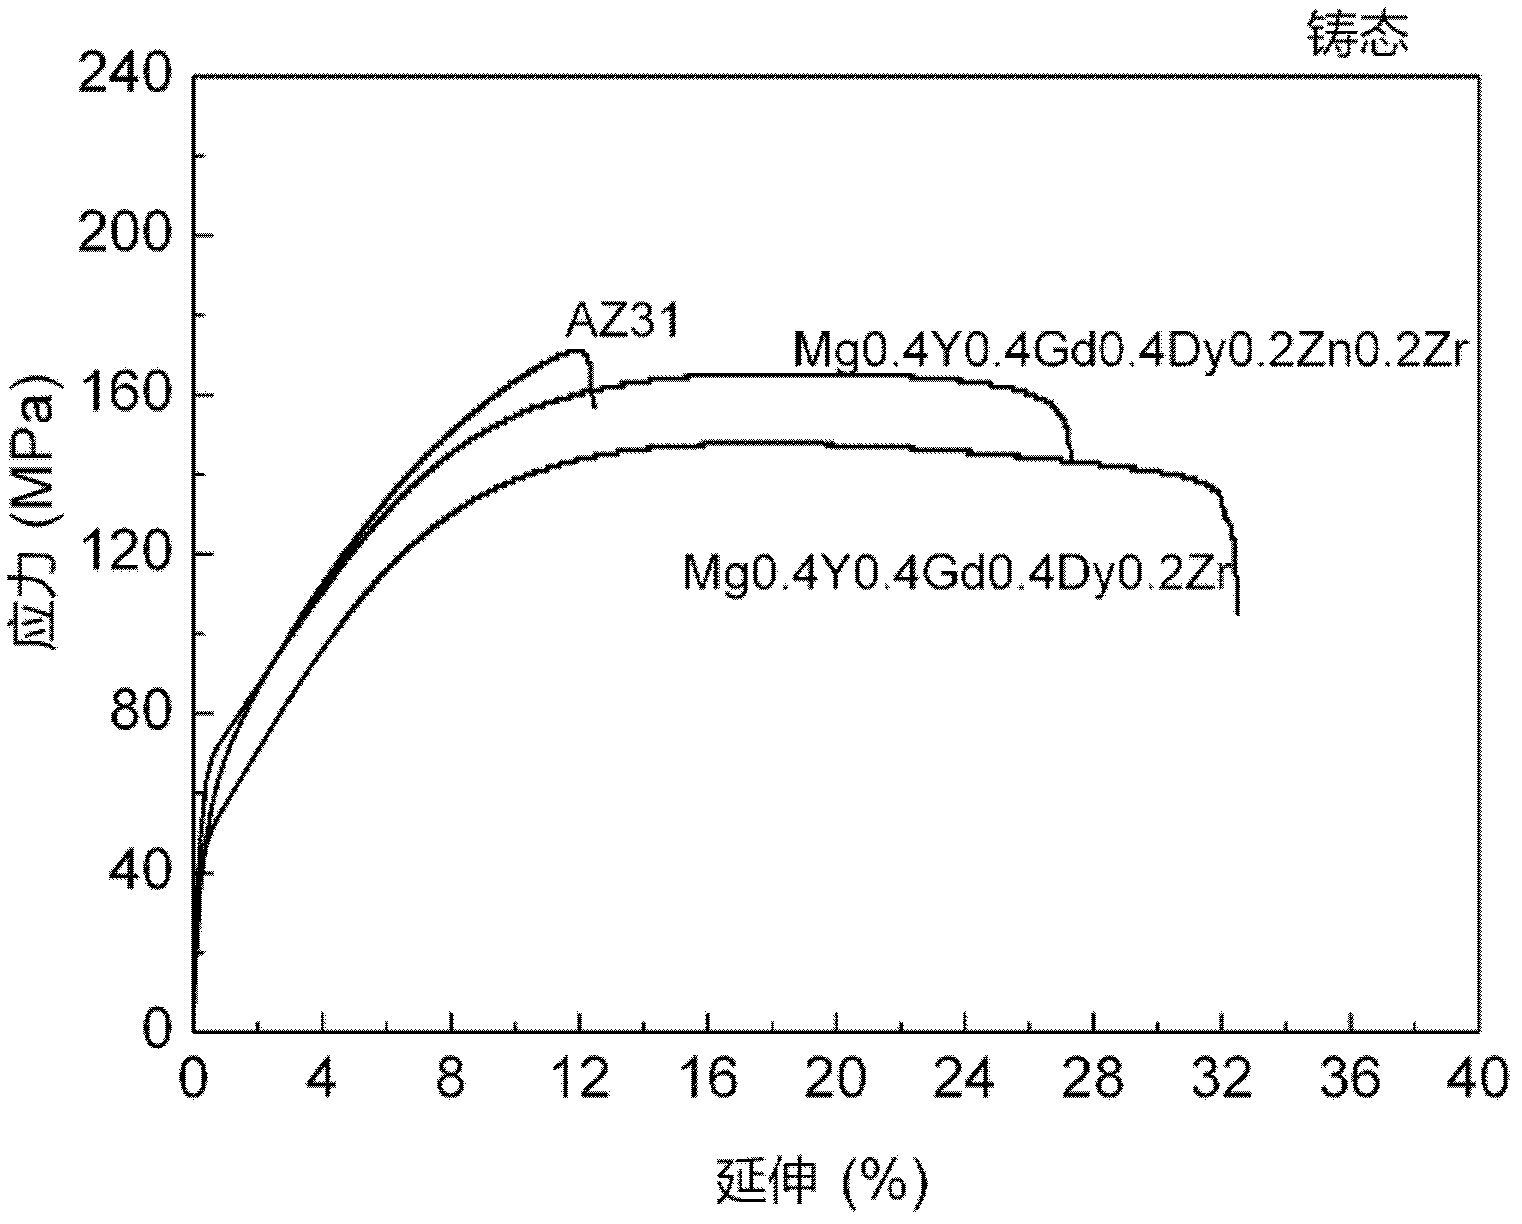 Single-phase solid solution cast or wrought magnesium alloys